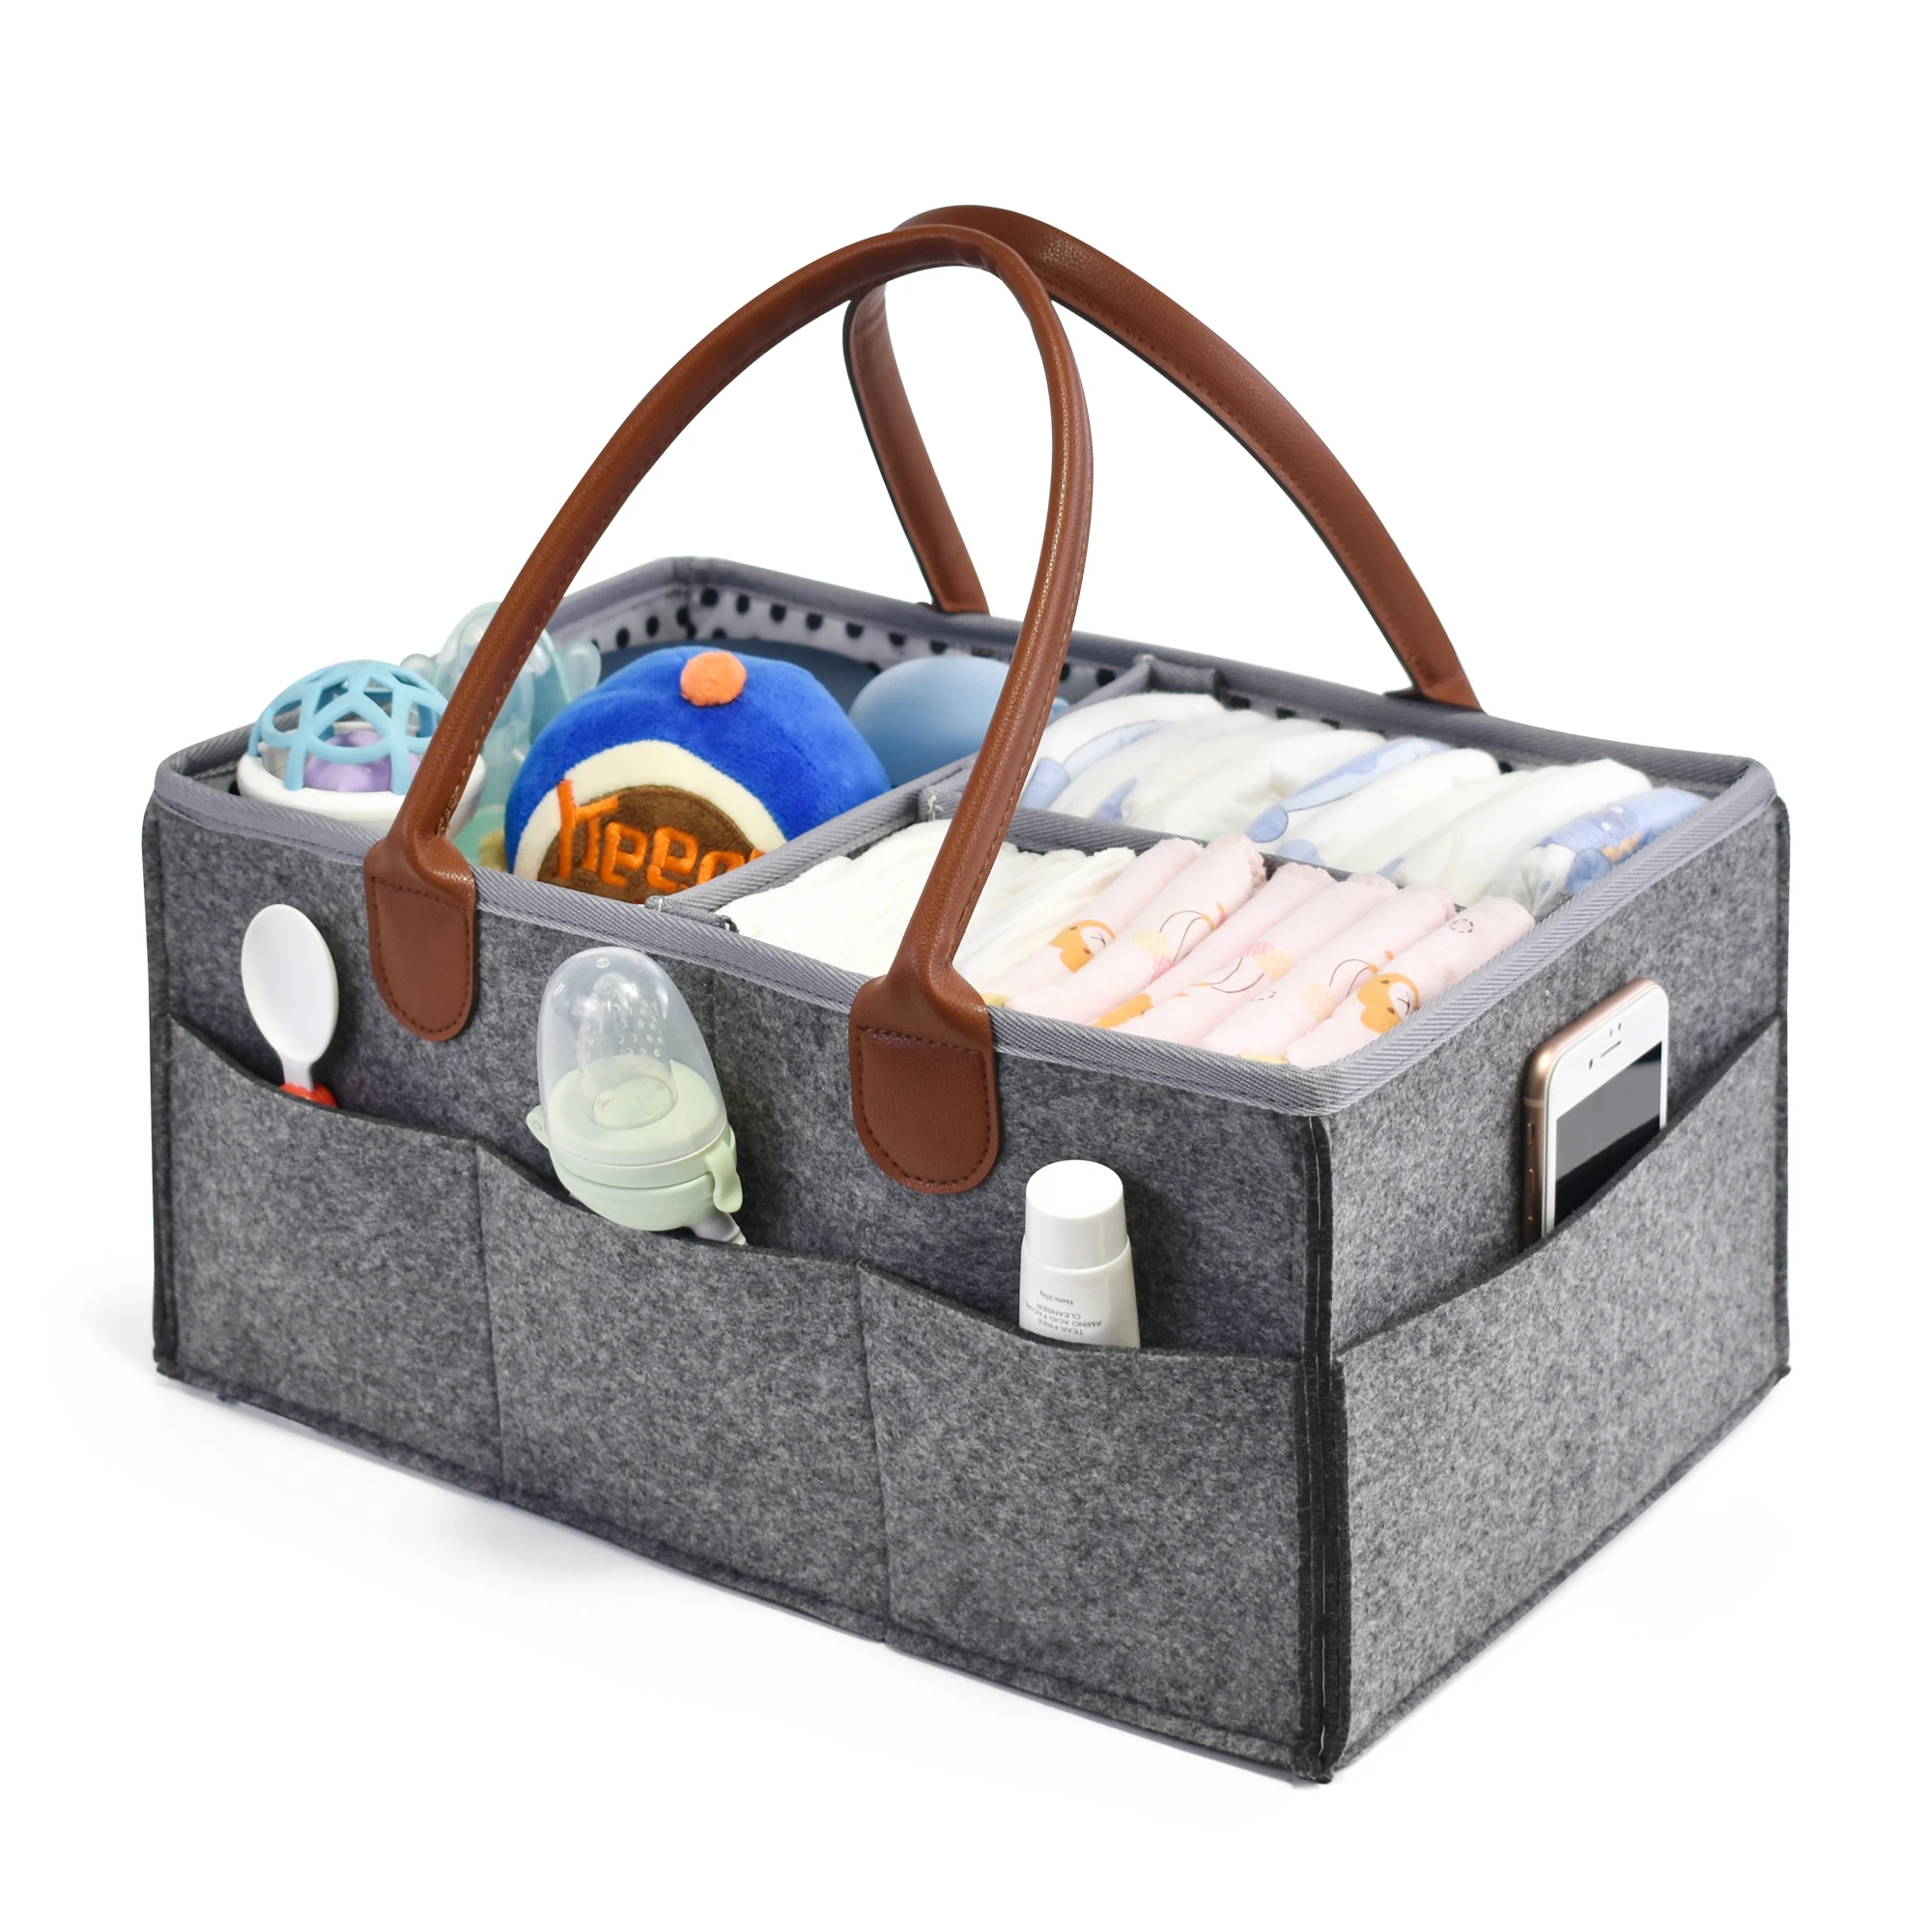 

Eco-friendly Easy& Convenient carrying sturdy Multi functional high quality felt diaper caddy, Customized colors